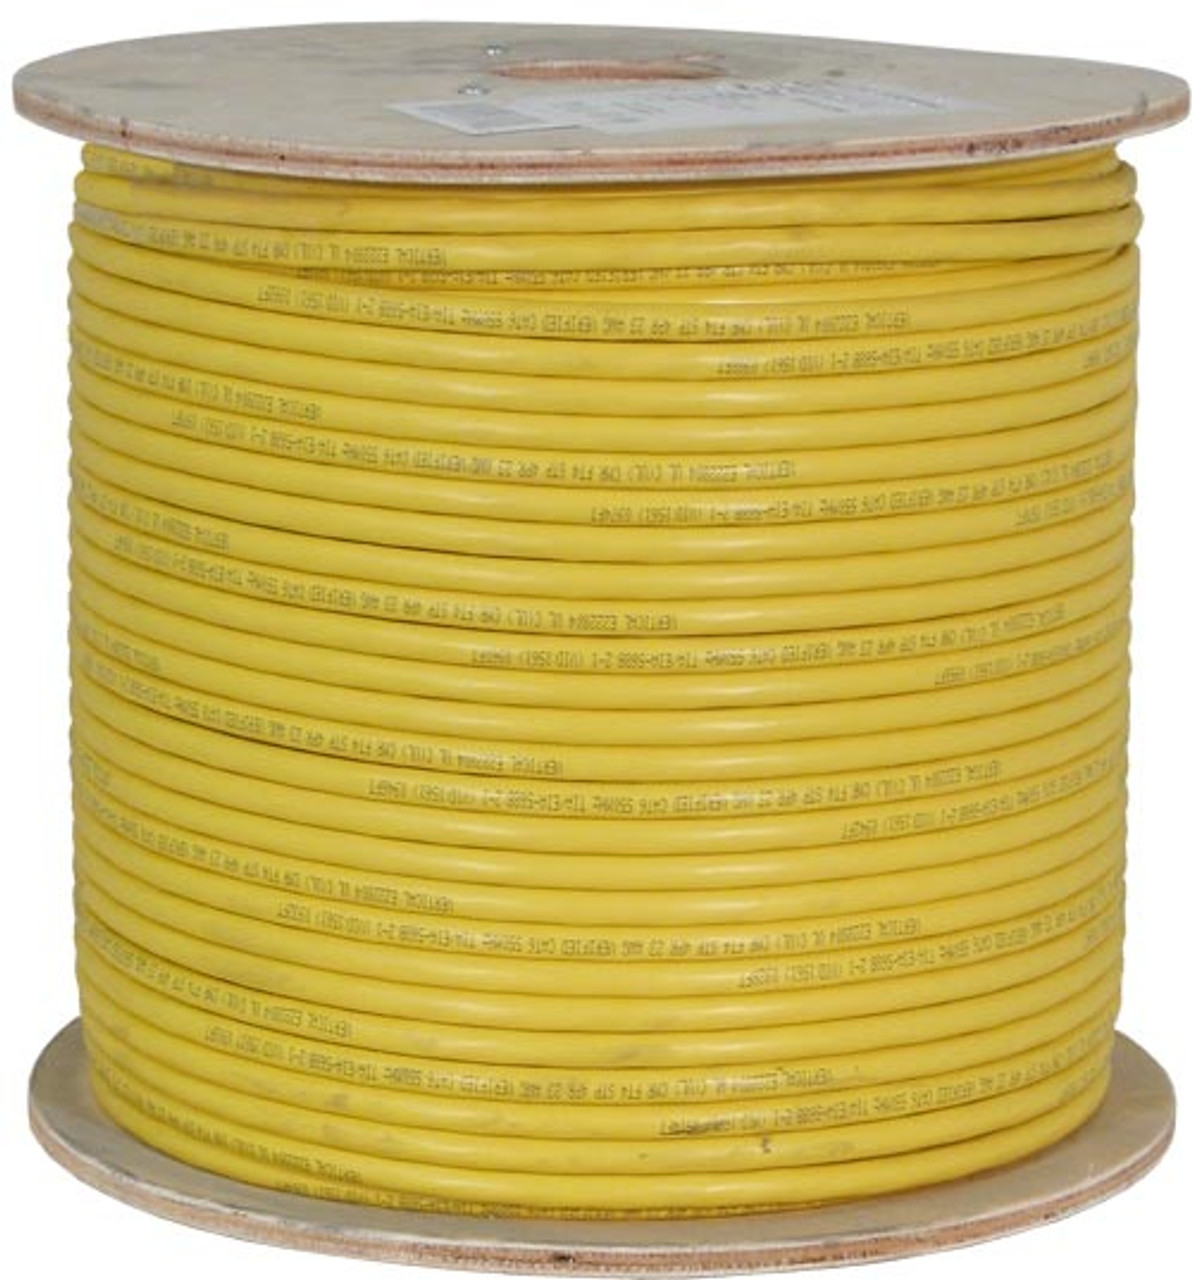 CAT6A (Augmented) 10Gb, UTP 1000, 8-Conductor, Yellow-PVC Jacket, AWG23 Solid-Bare Copper, Wooden Spool